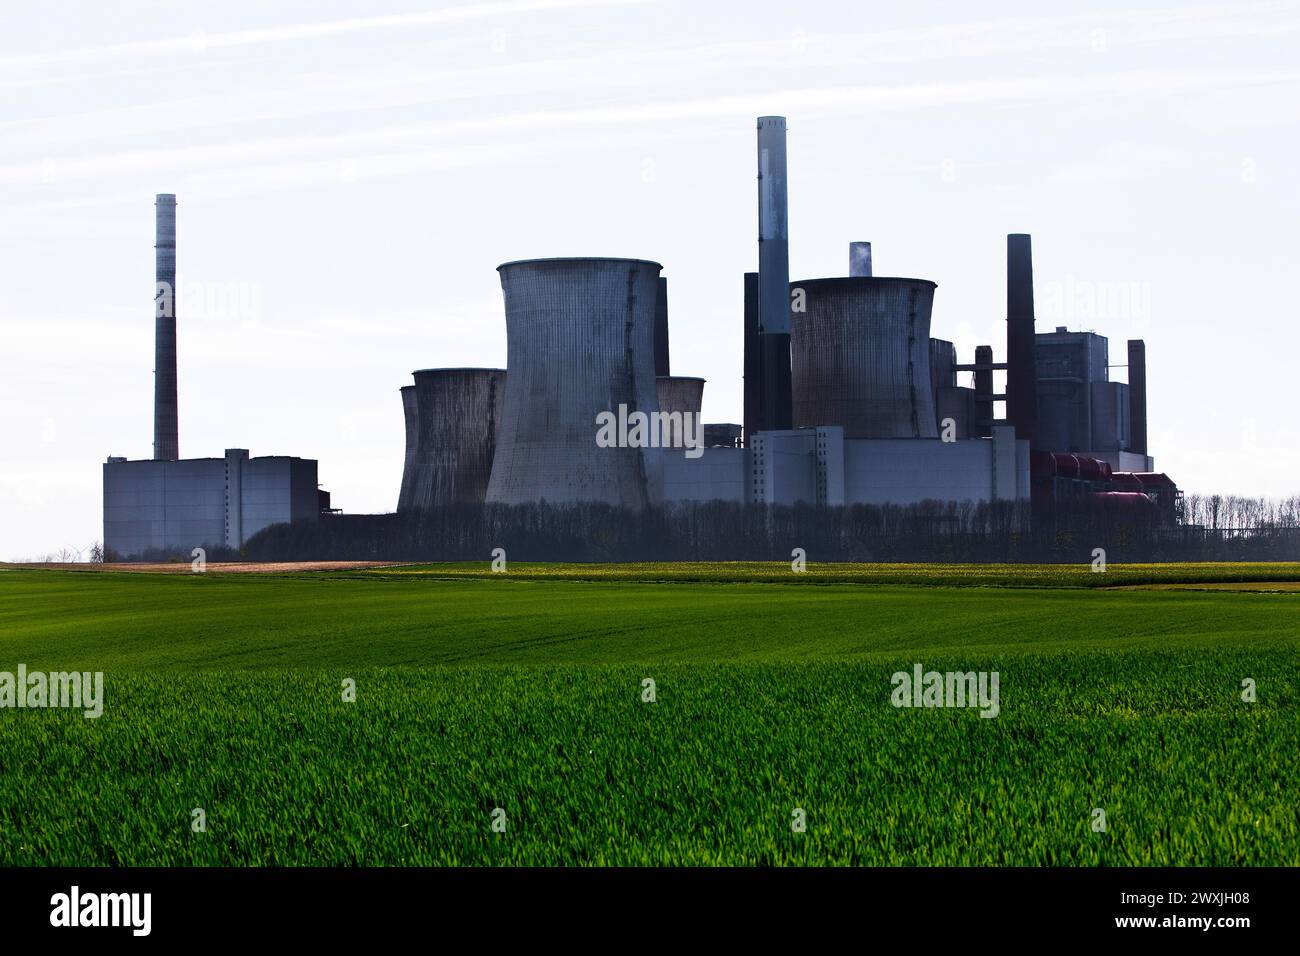 Neurath lignite-fired power plant, shut down and finally decommissioned units A to E, Grevenbroich, North Rhine-Westphalia, Germany Stock Photo